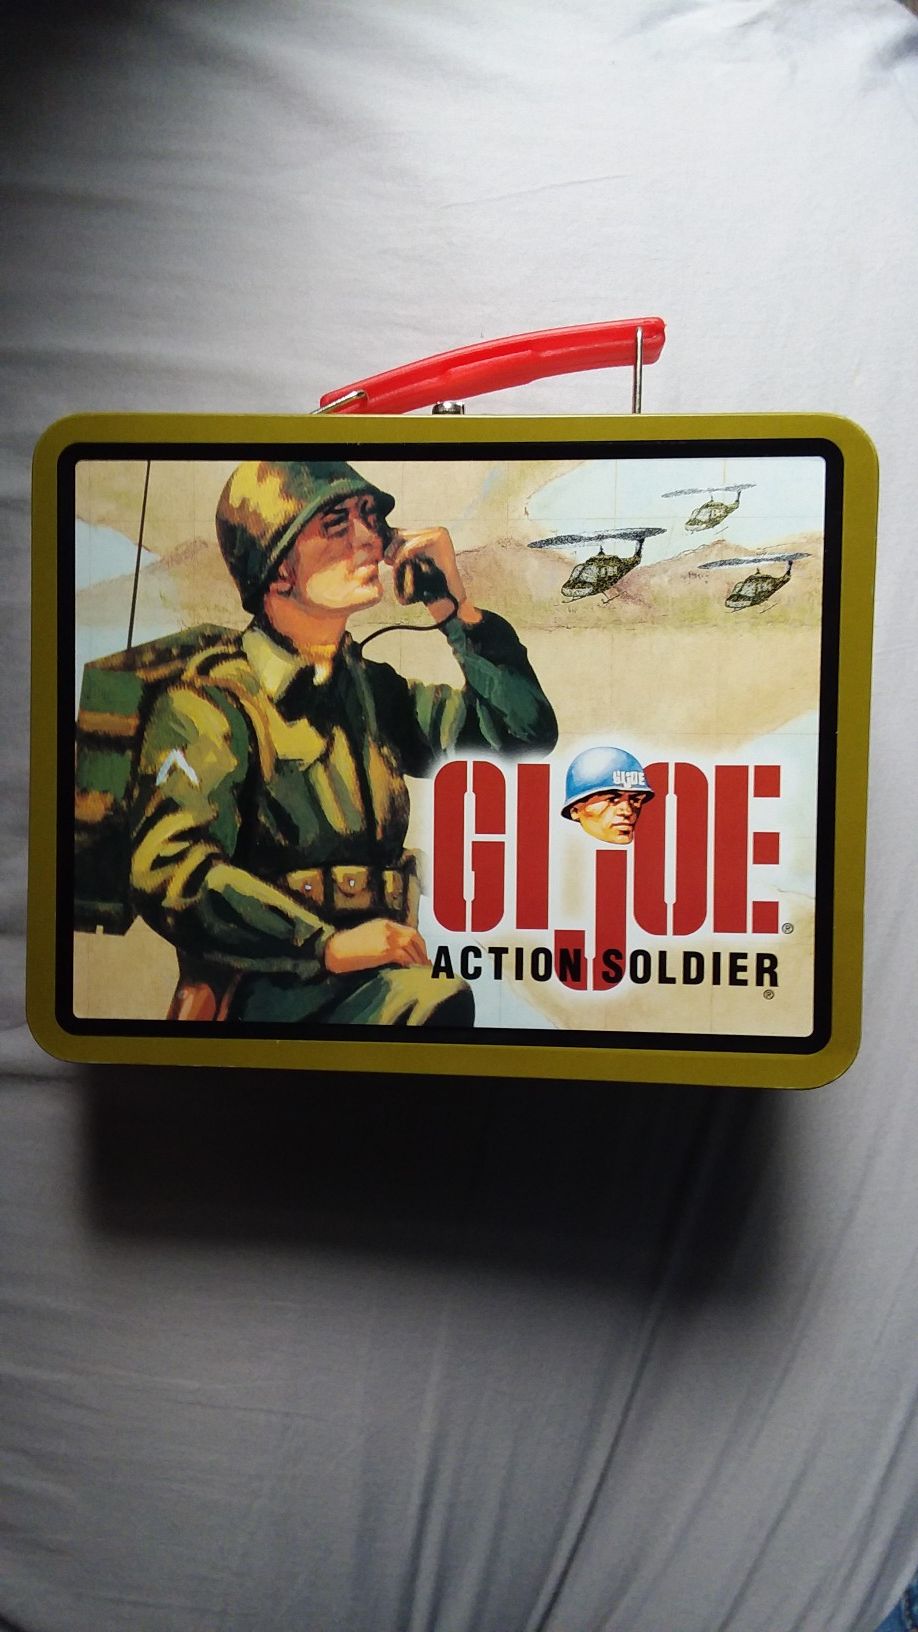 1997 Gi joe lunch box .PM me for a offer